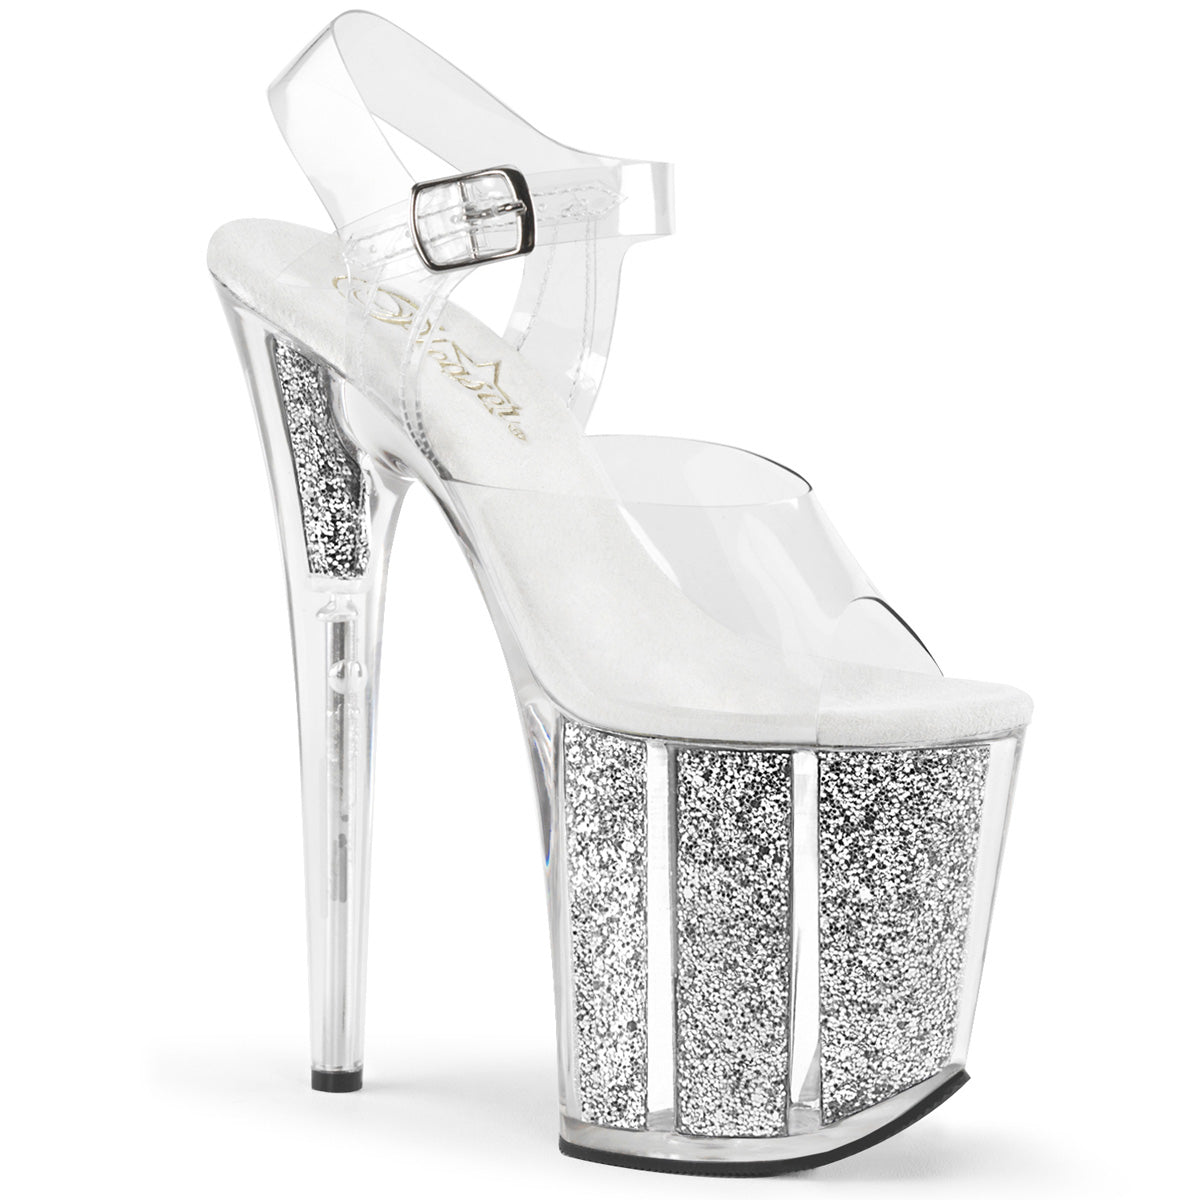 FLAMINGO-808G 8" Heel Clear Silver Glitter Exotic Dancing Shoes